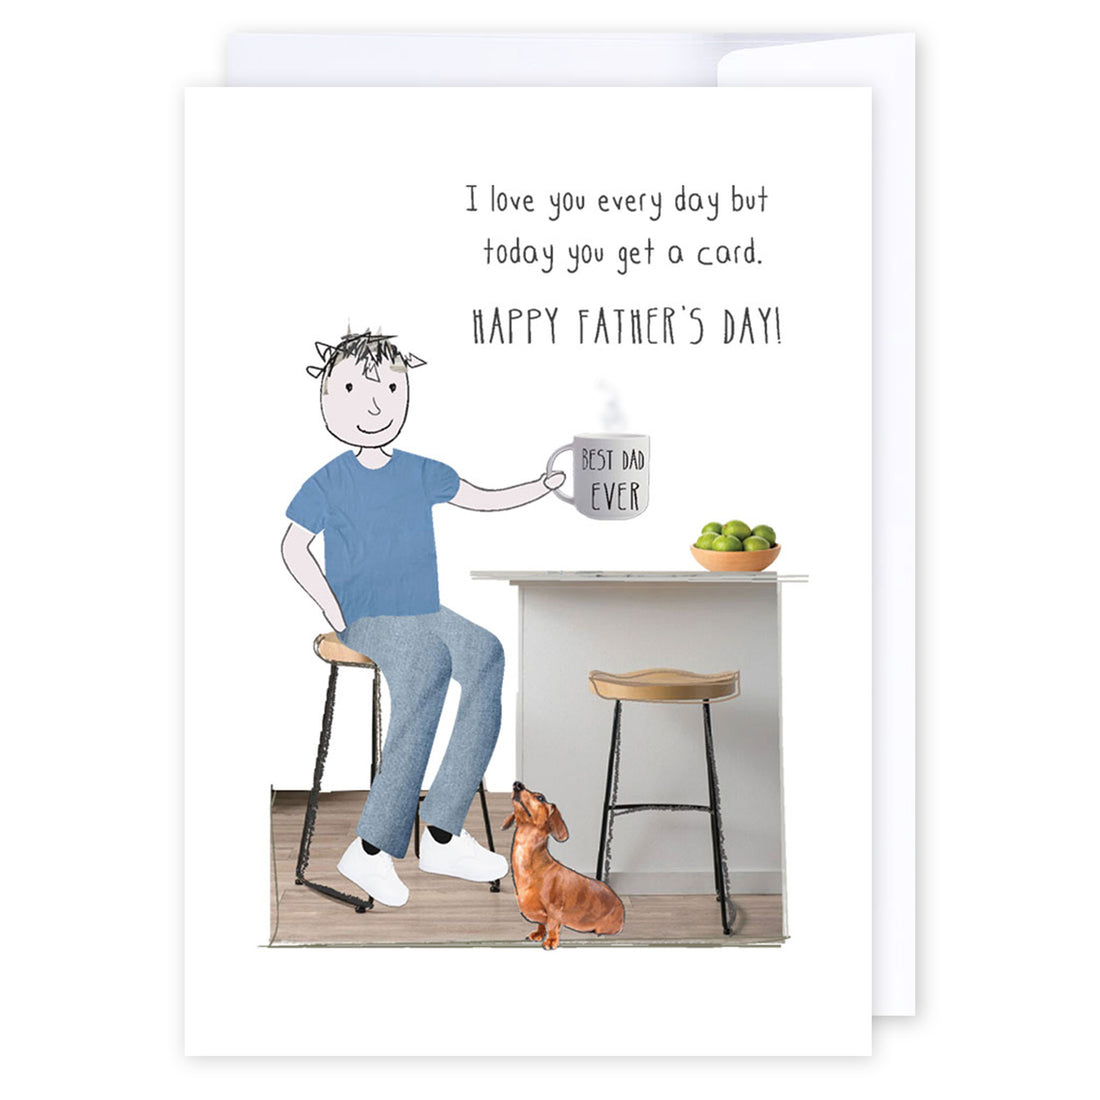 Today you get a card Dad